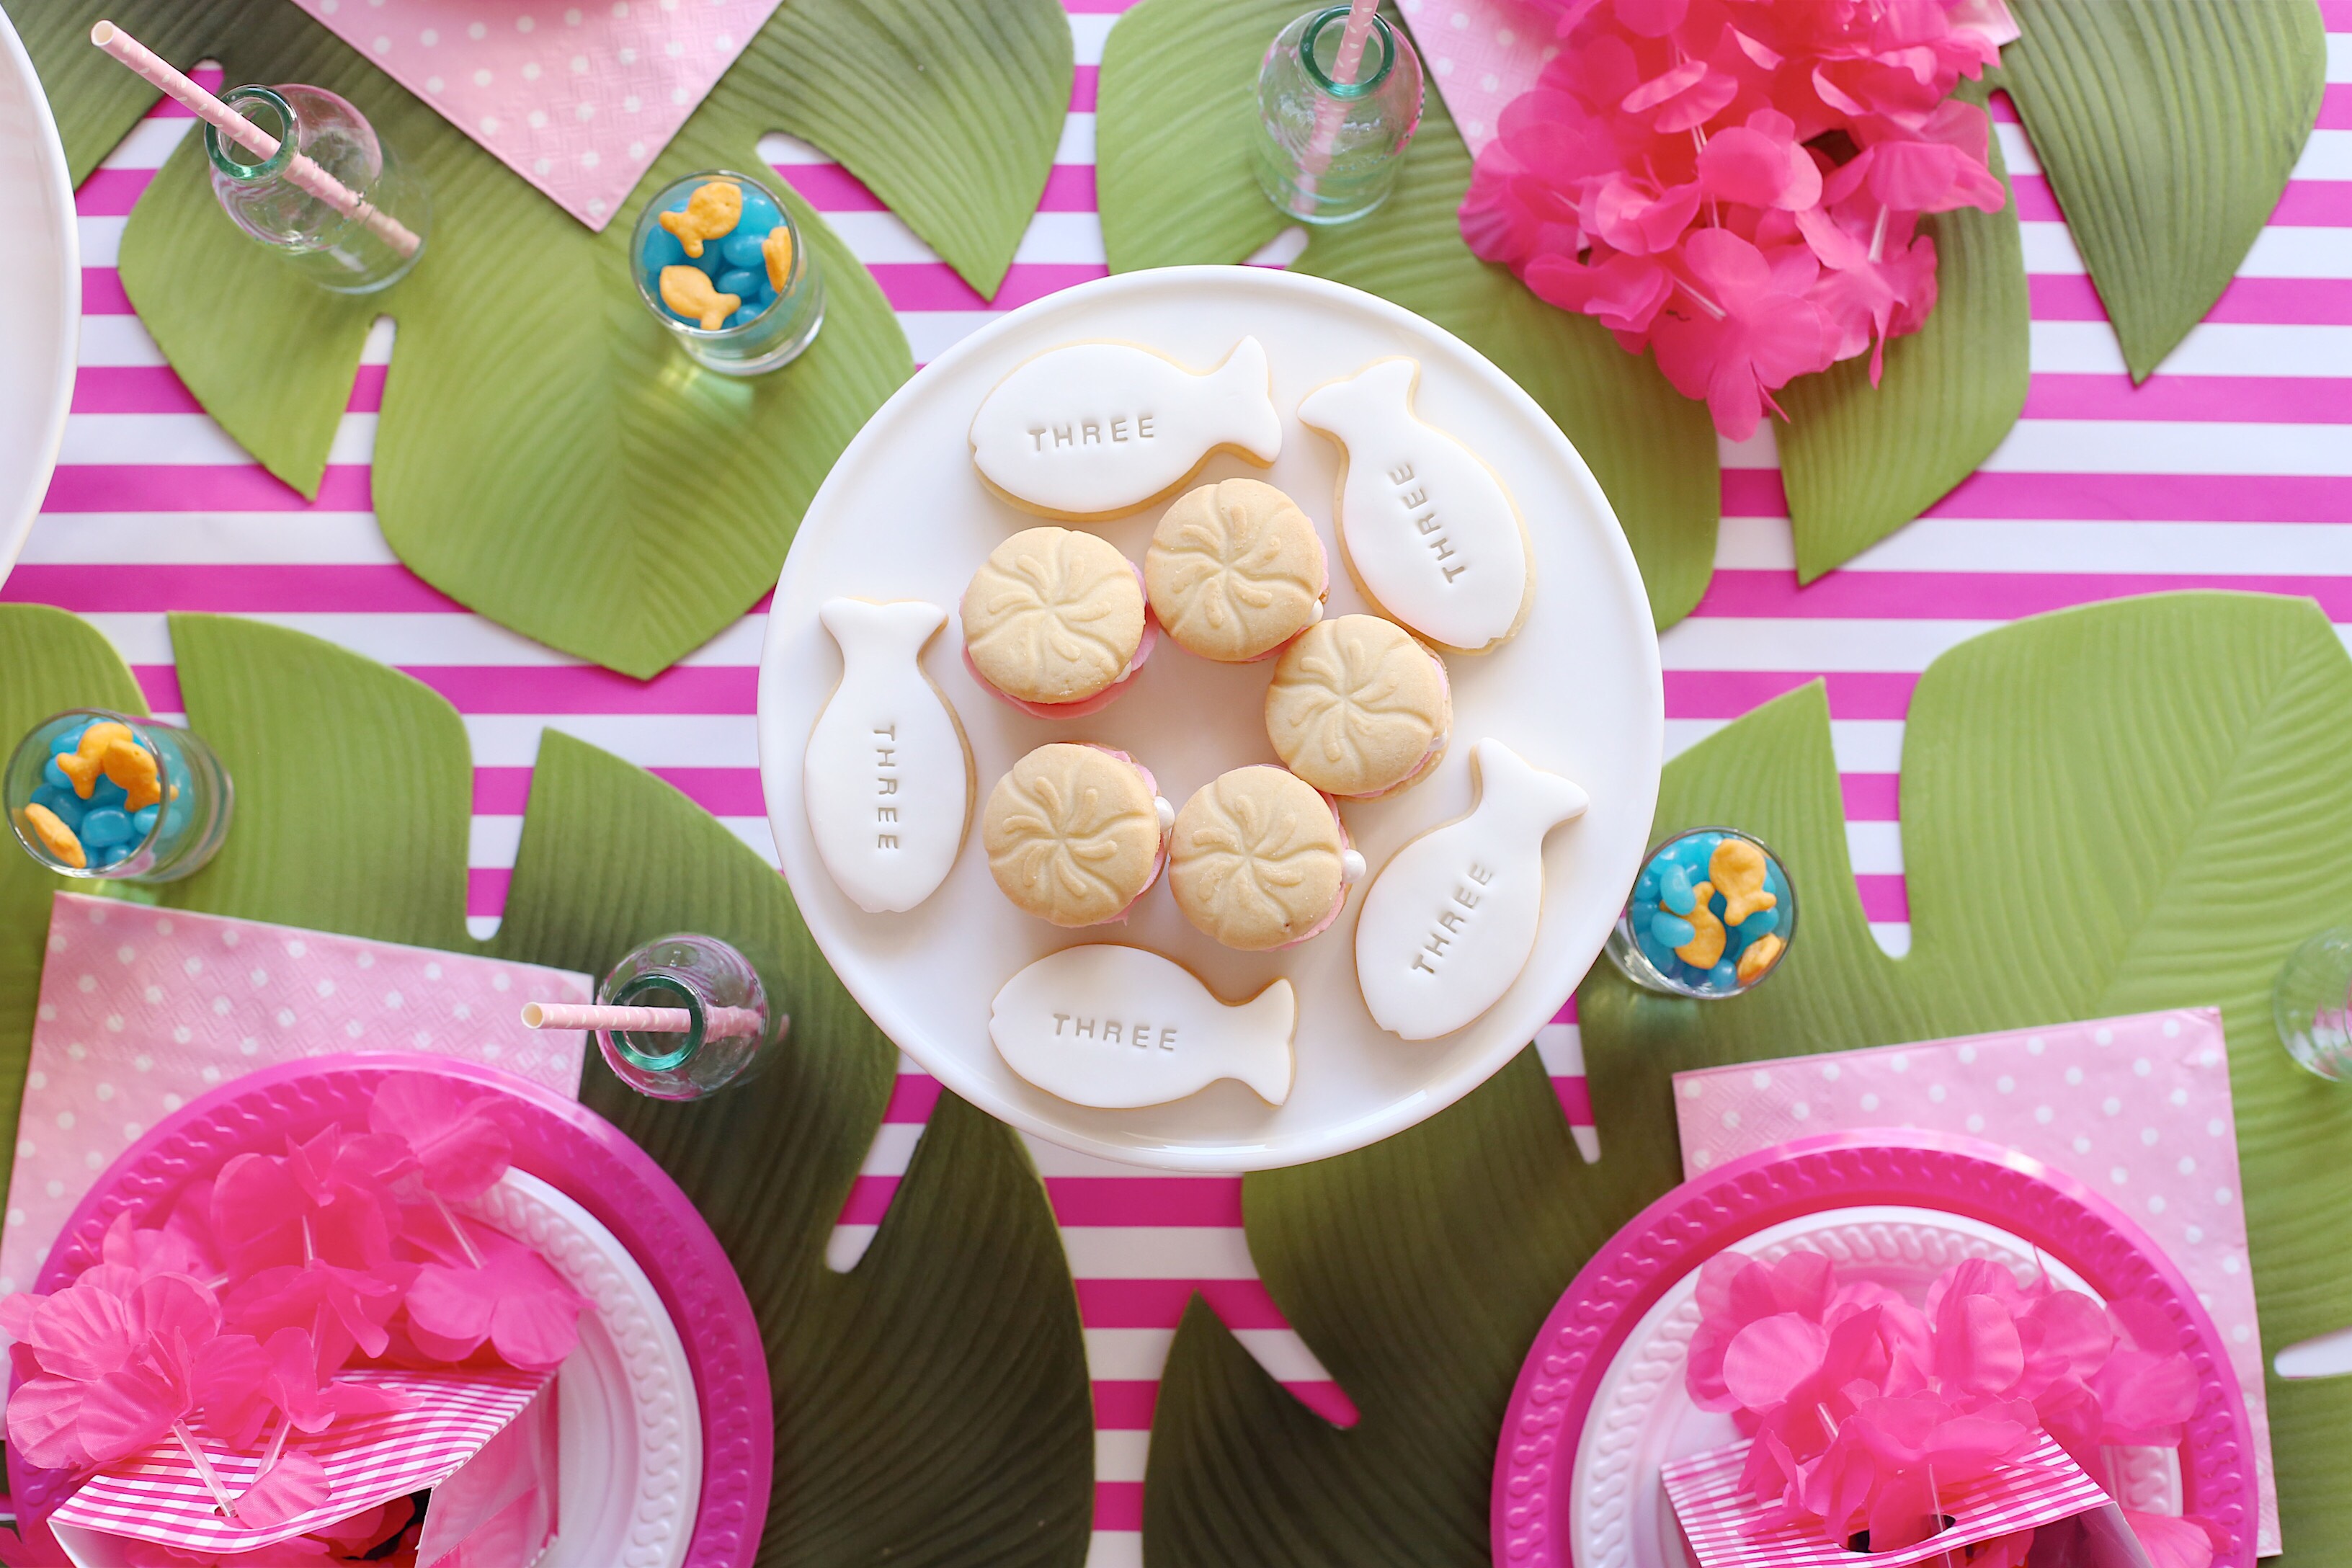 Tropical Moana table setting with cookies